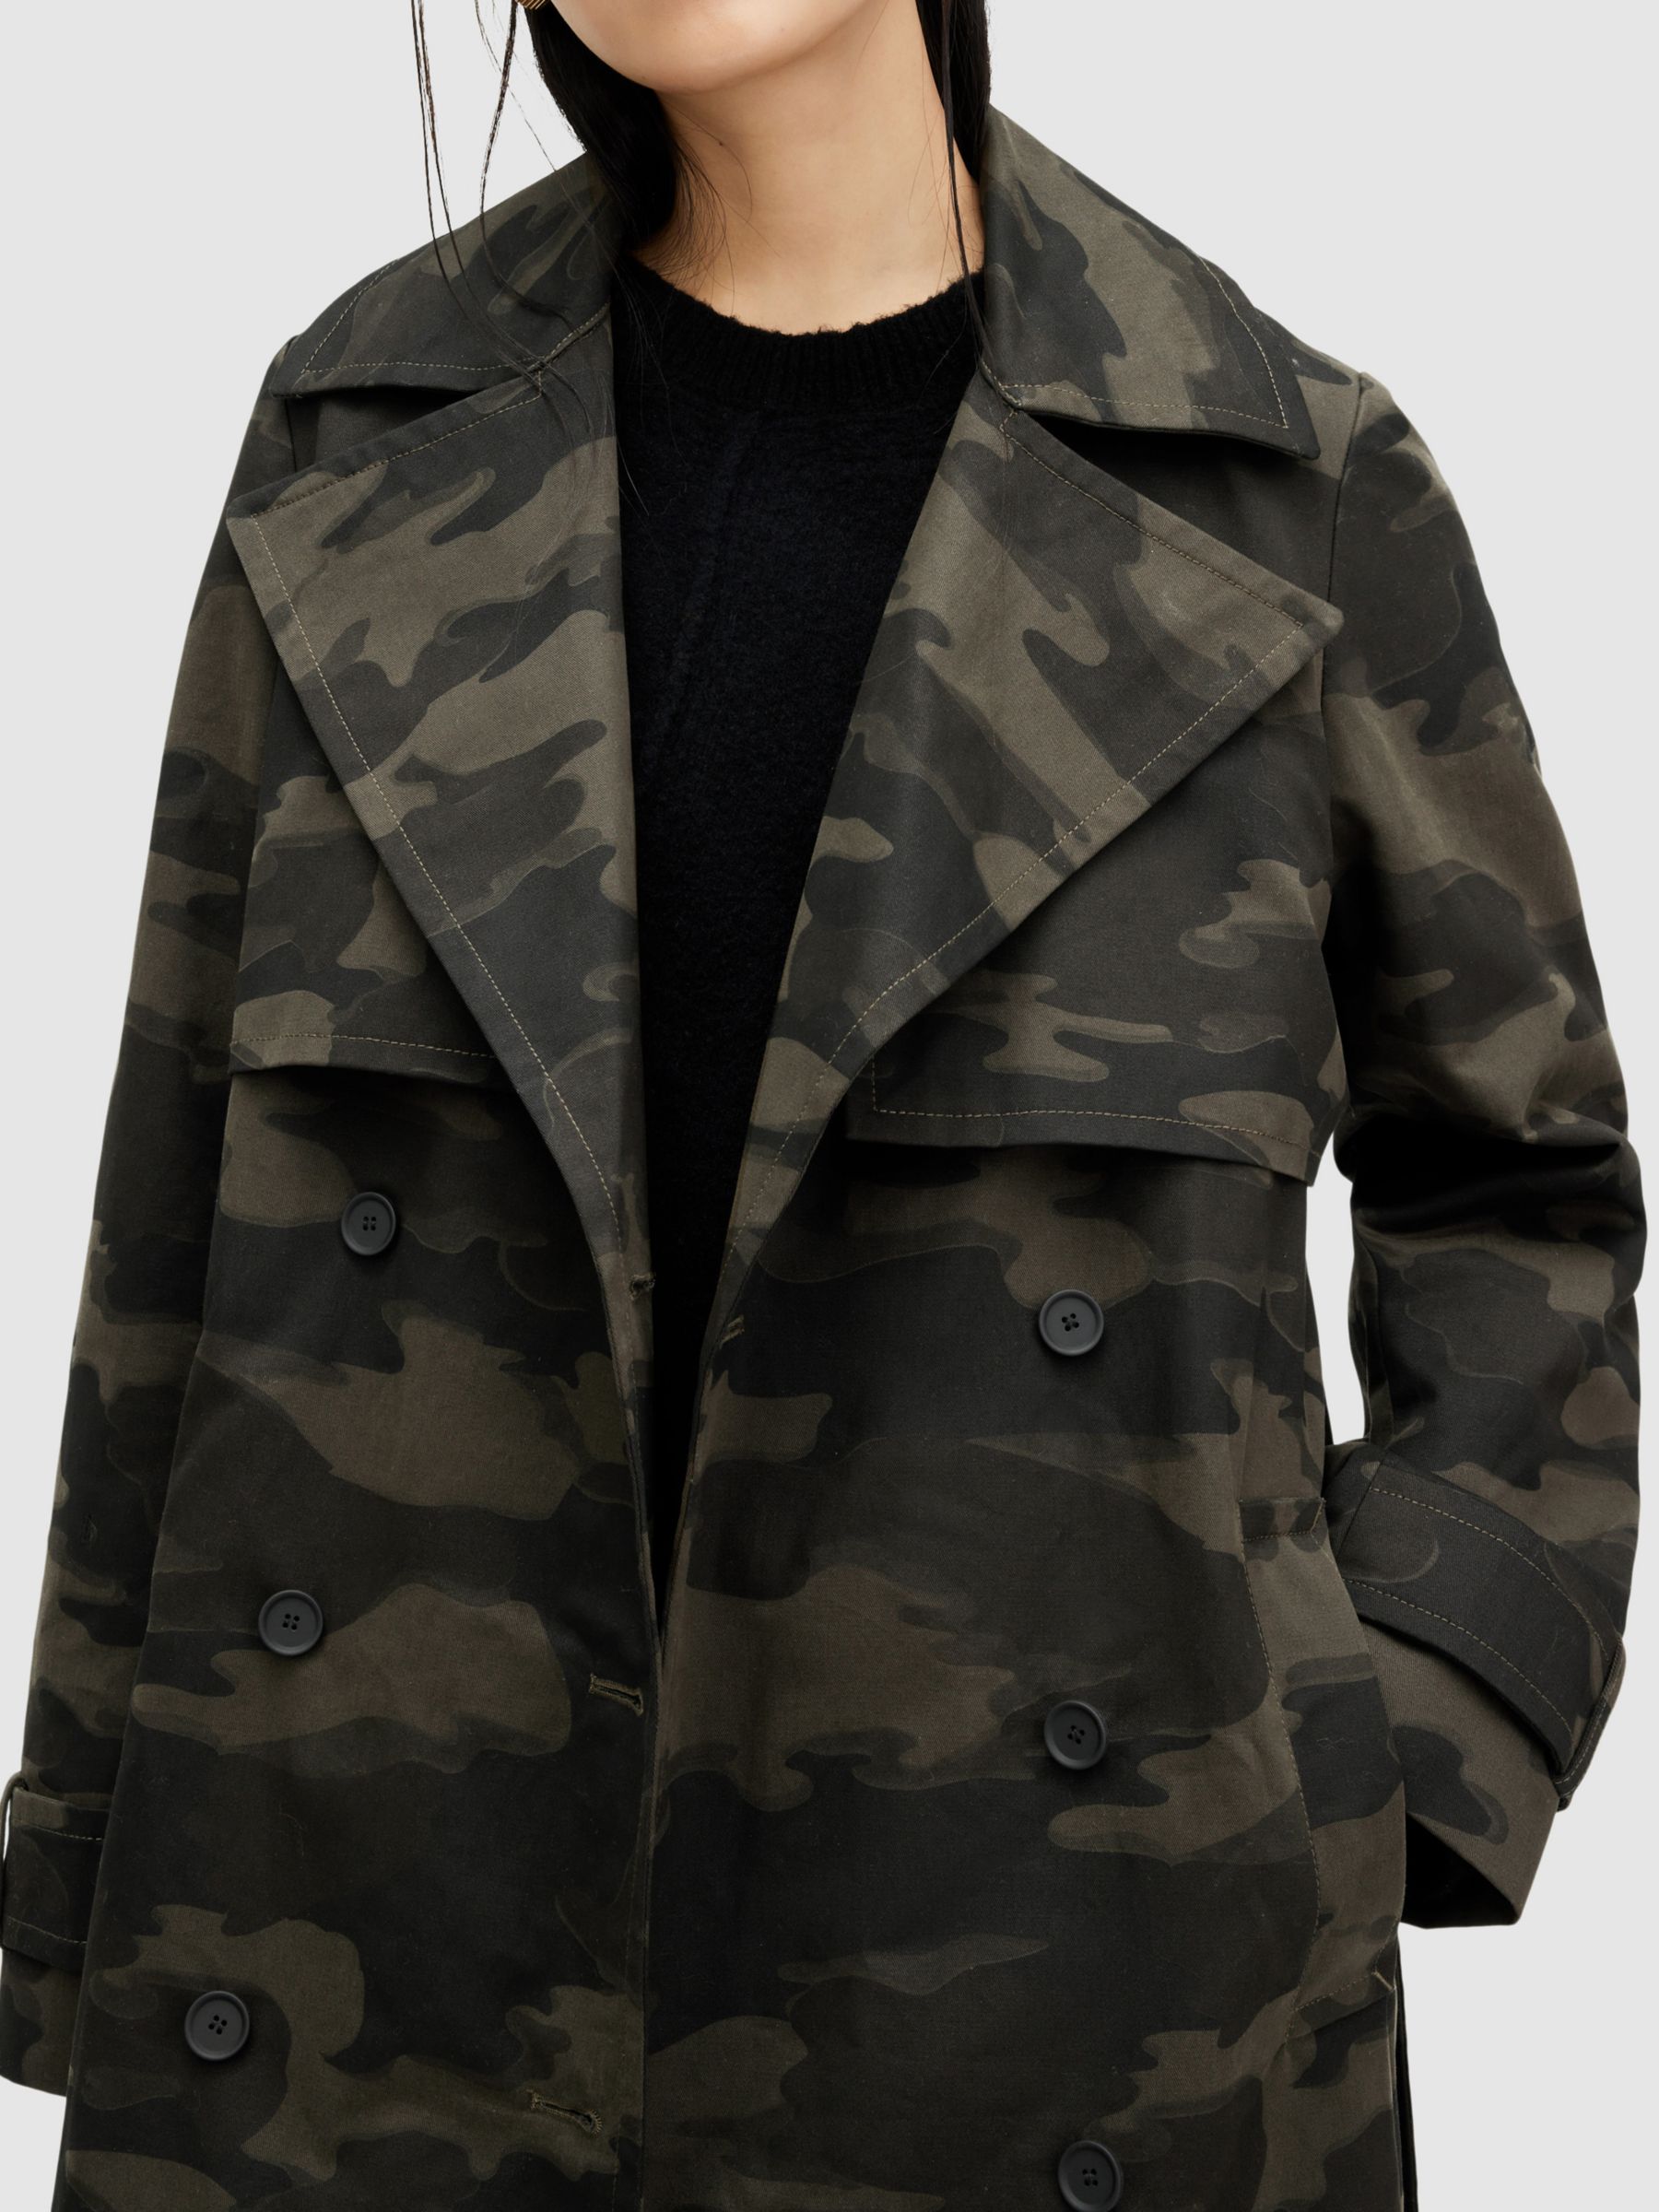 Buy AllSaints Mixie Double Breasted Camouflage Trench Coat, Brown Online at johnlewis.com